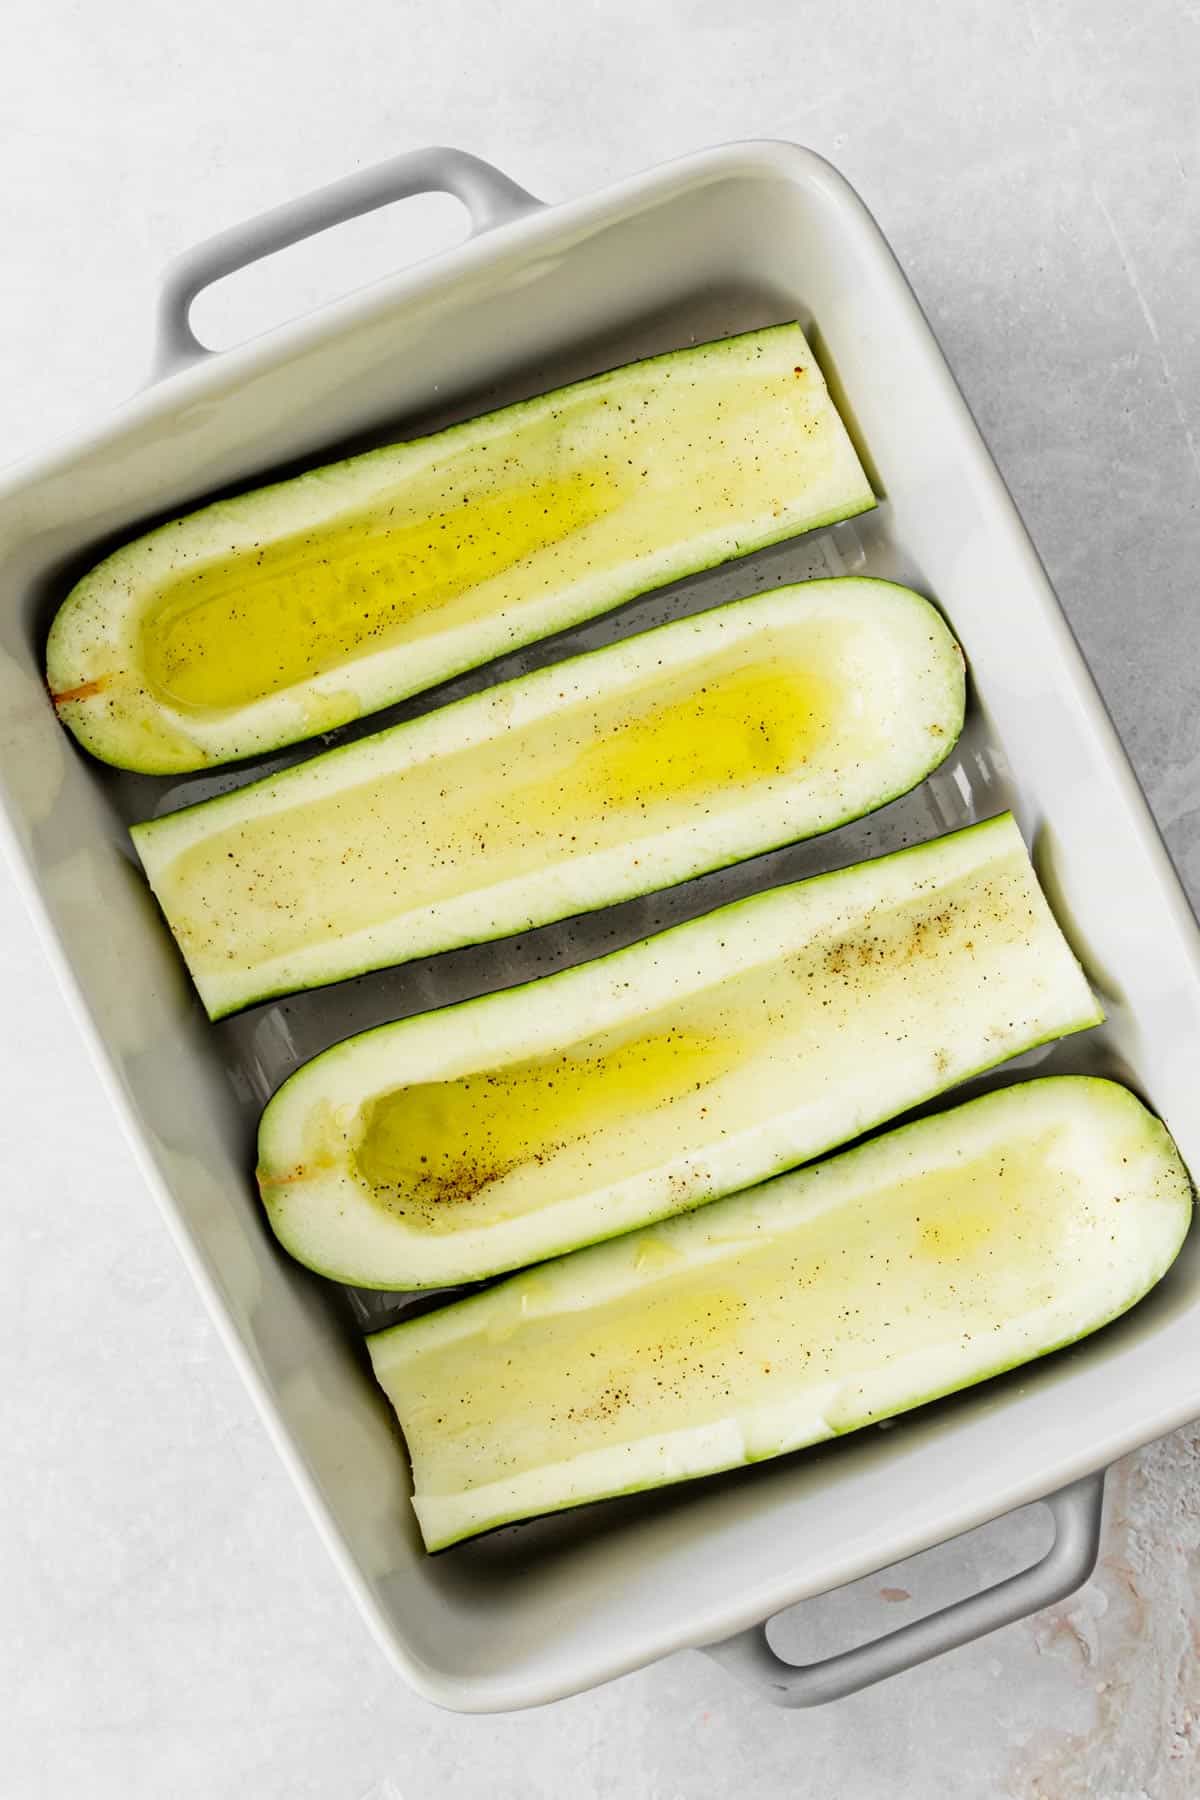 zucchini boats without seeds ready for baking